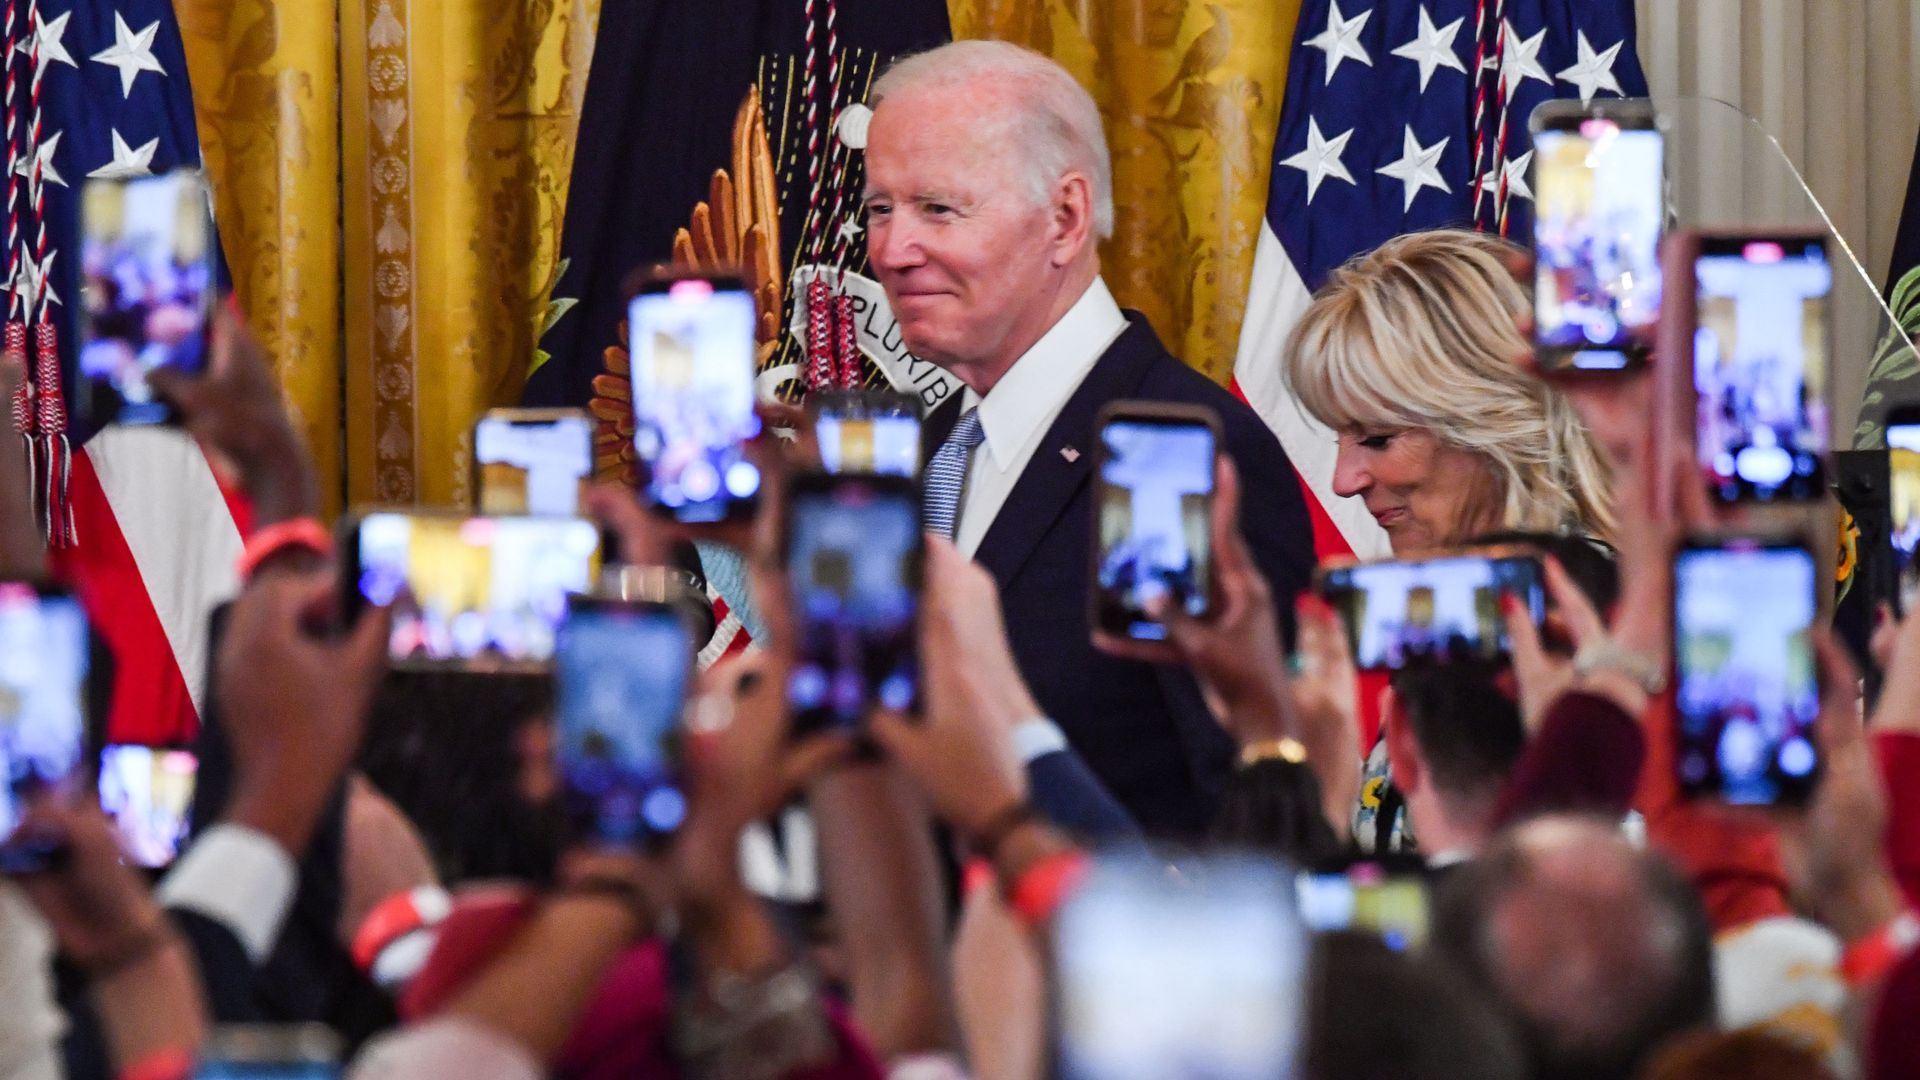 President Biden and first lady Jill Biden are seen entering an Eid celebration at the White House.